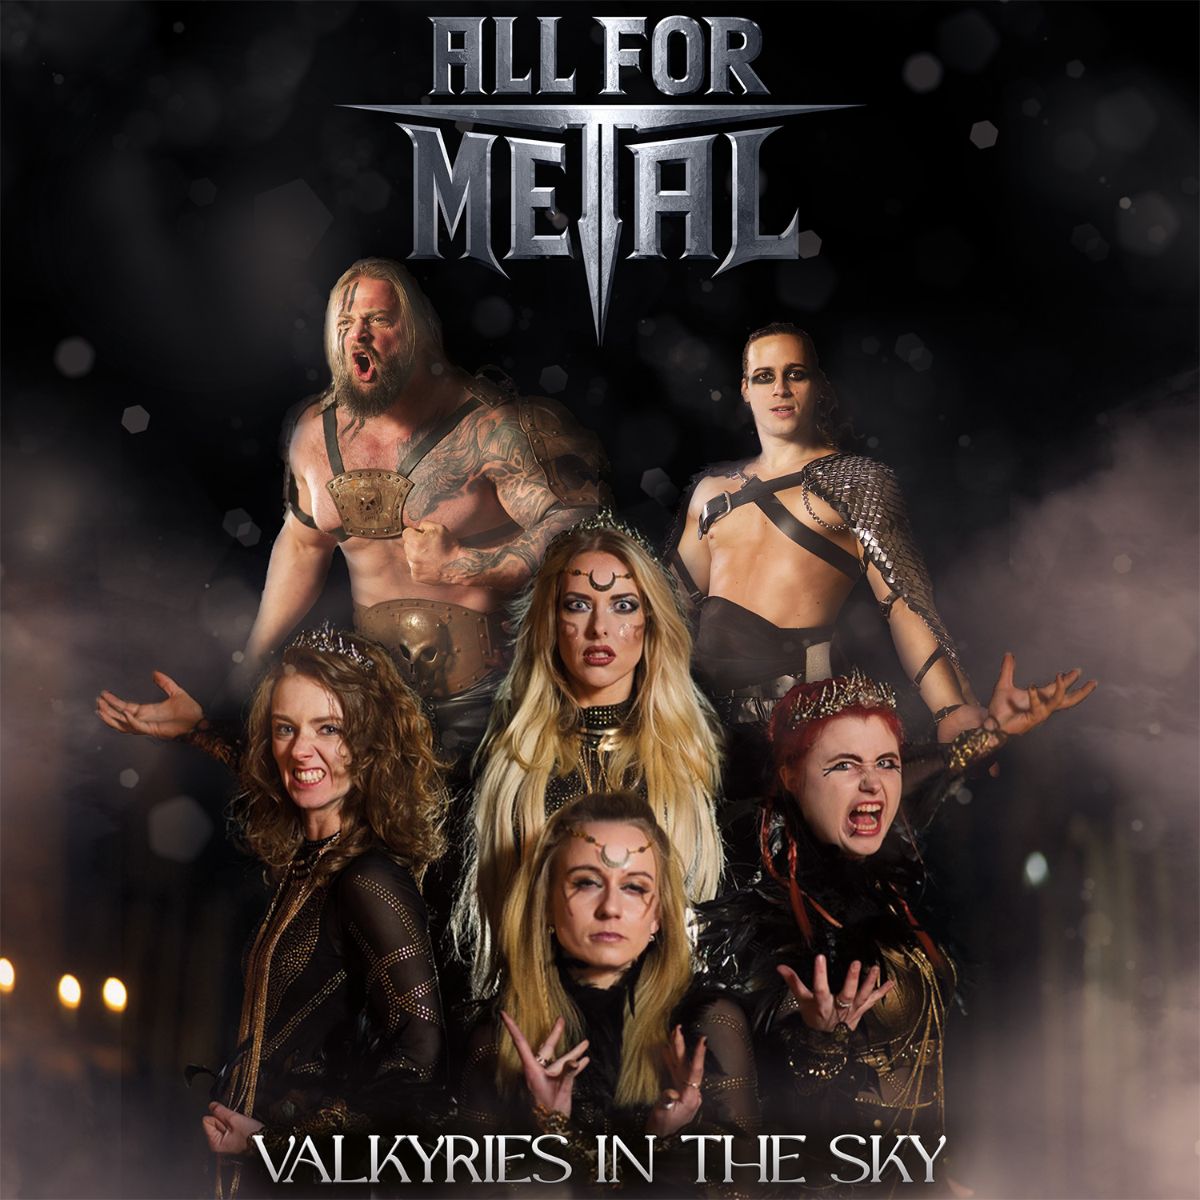 ALL FOR METAL (Heavy Metal - International) - Release 'Valkyries In The Sky' (feat. @LauraGuldemond & Tim Hansen) (Official Music Video) via Reigning Phoenix Music #allformetal #heavymetal wp.me/p9NC0l-hY7